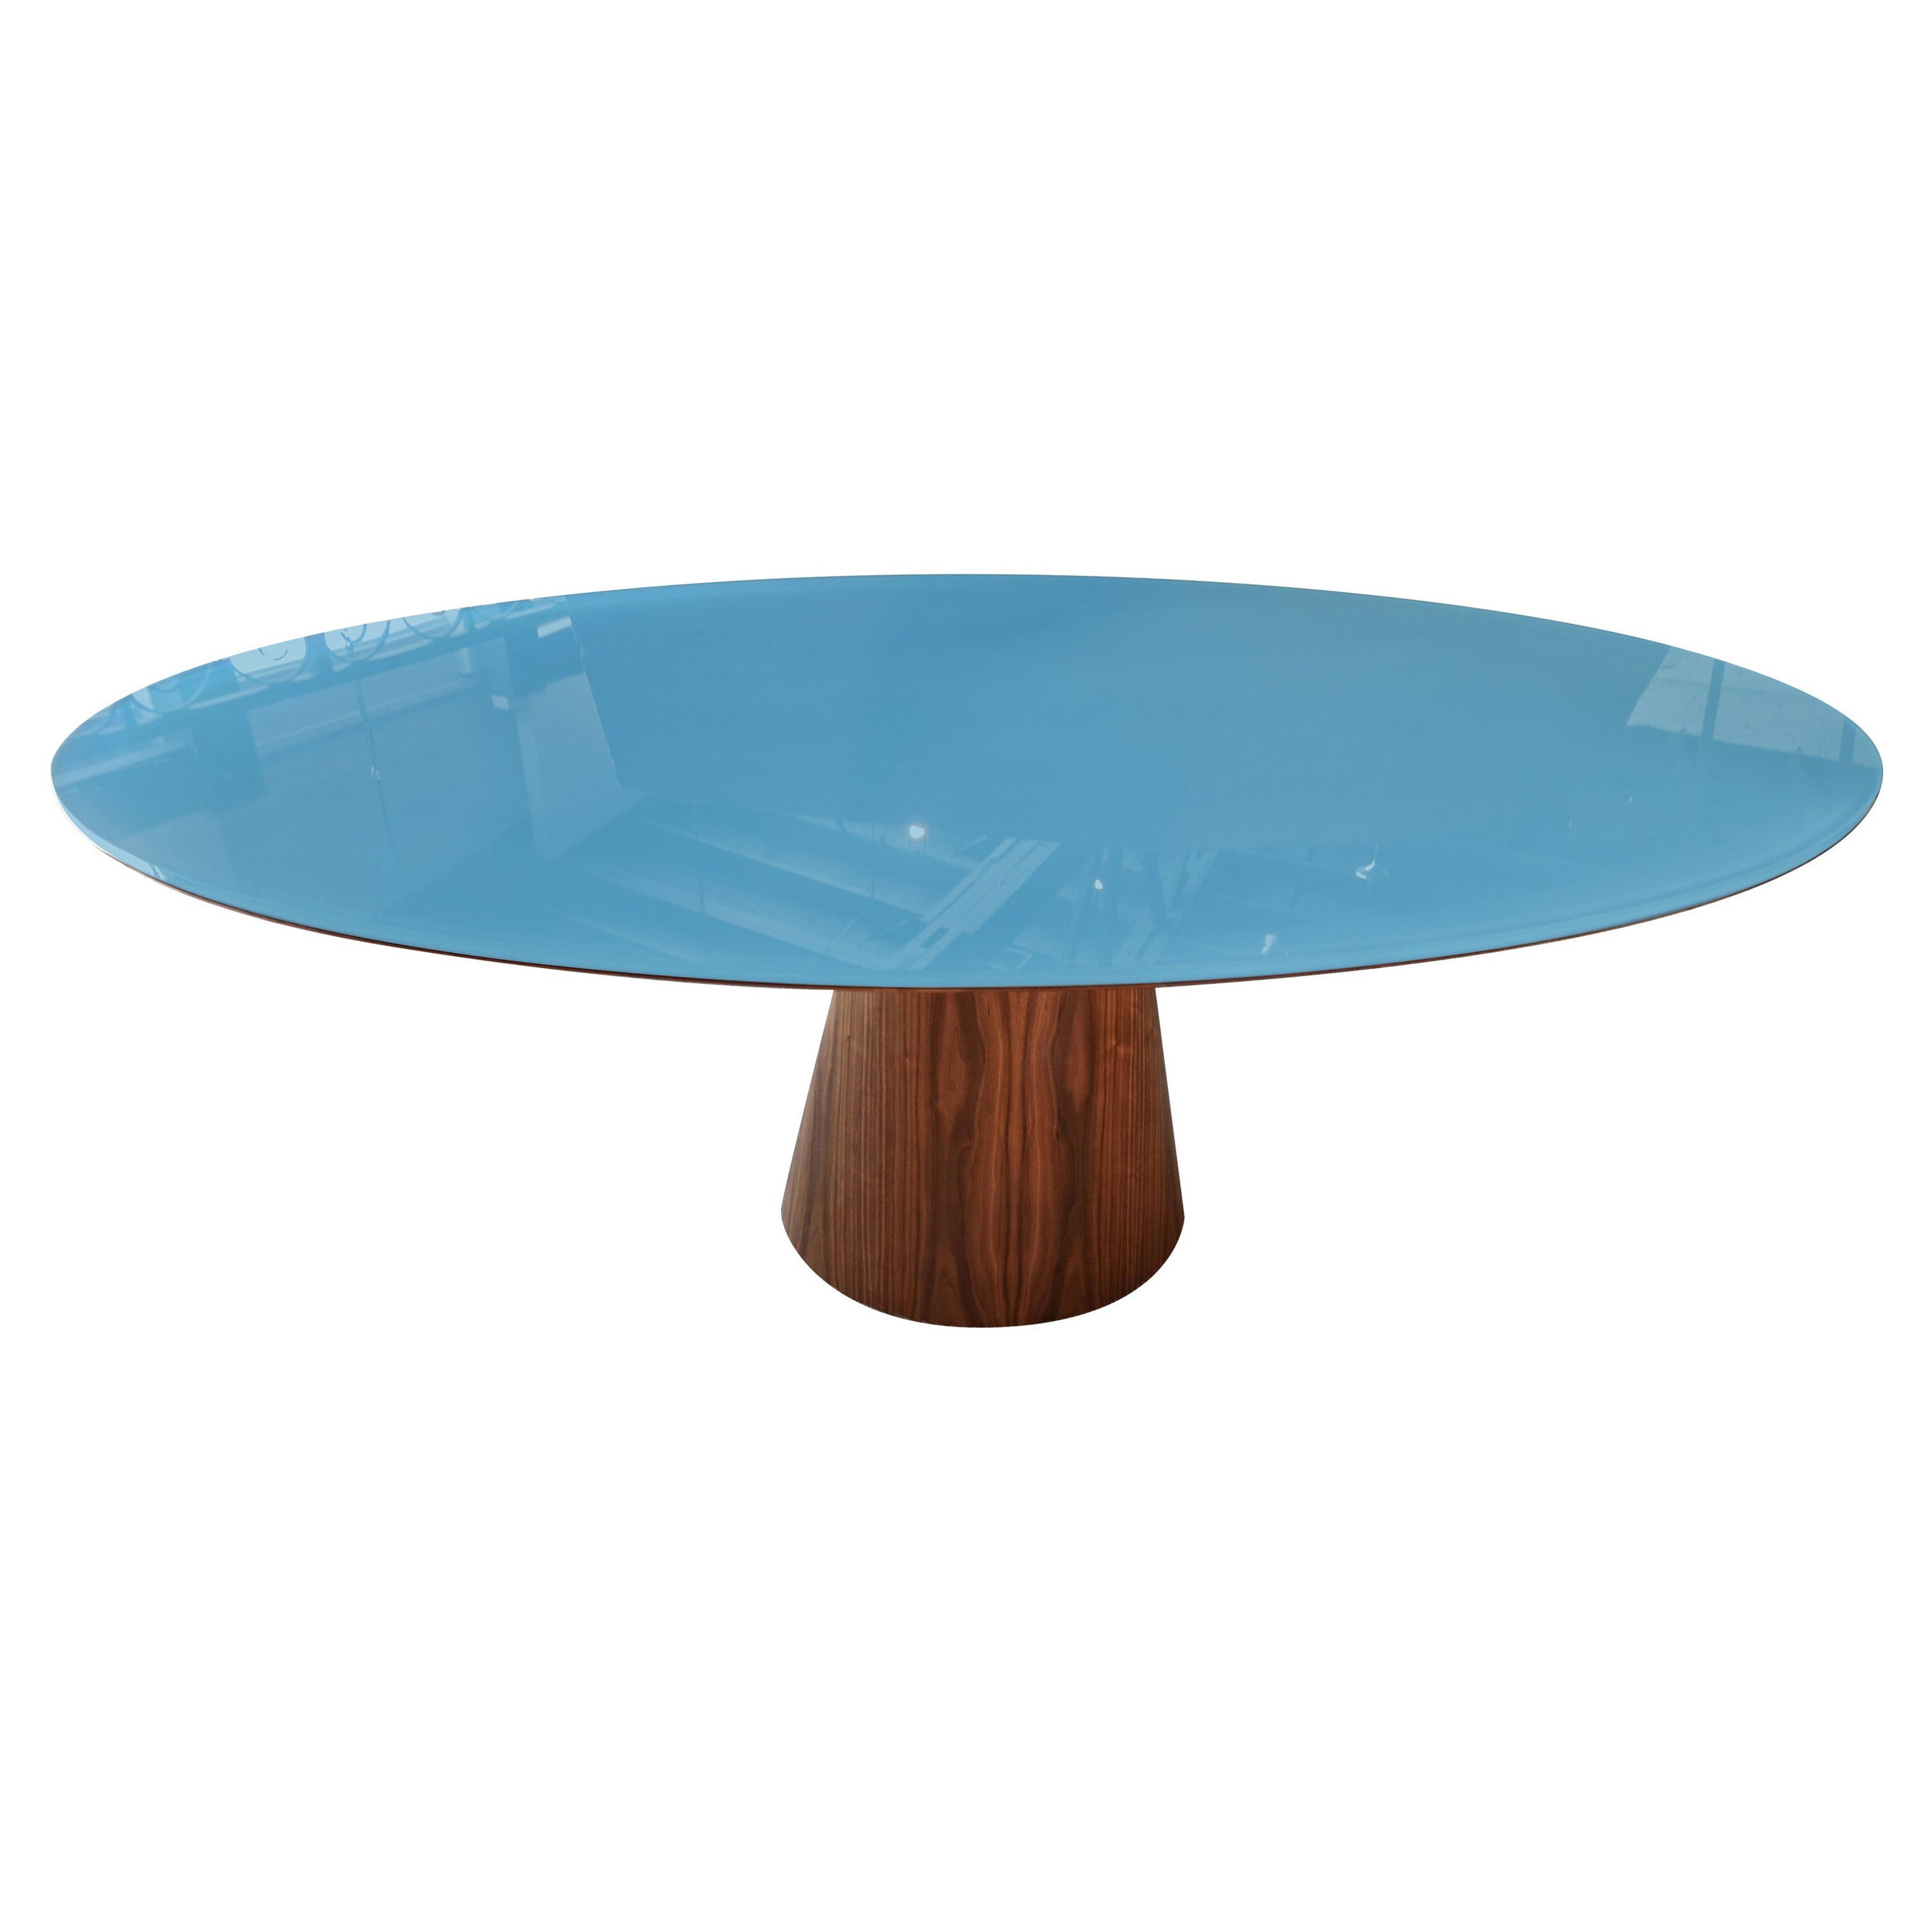 Custom Midcentury Style Walnut Oval Dining Table with Glass Top by Adesso